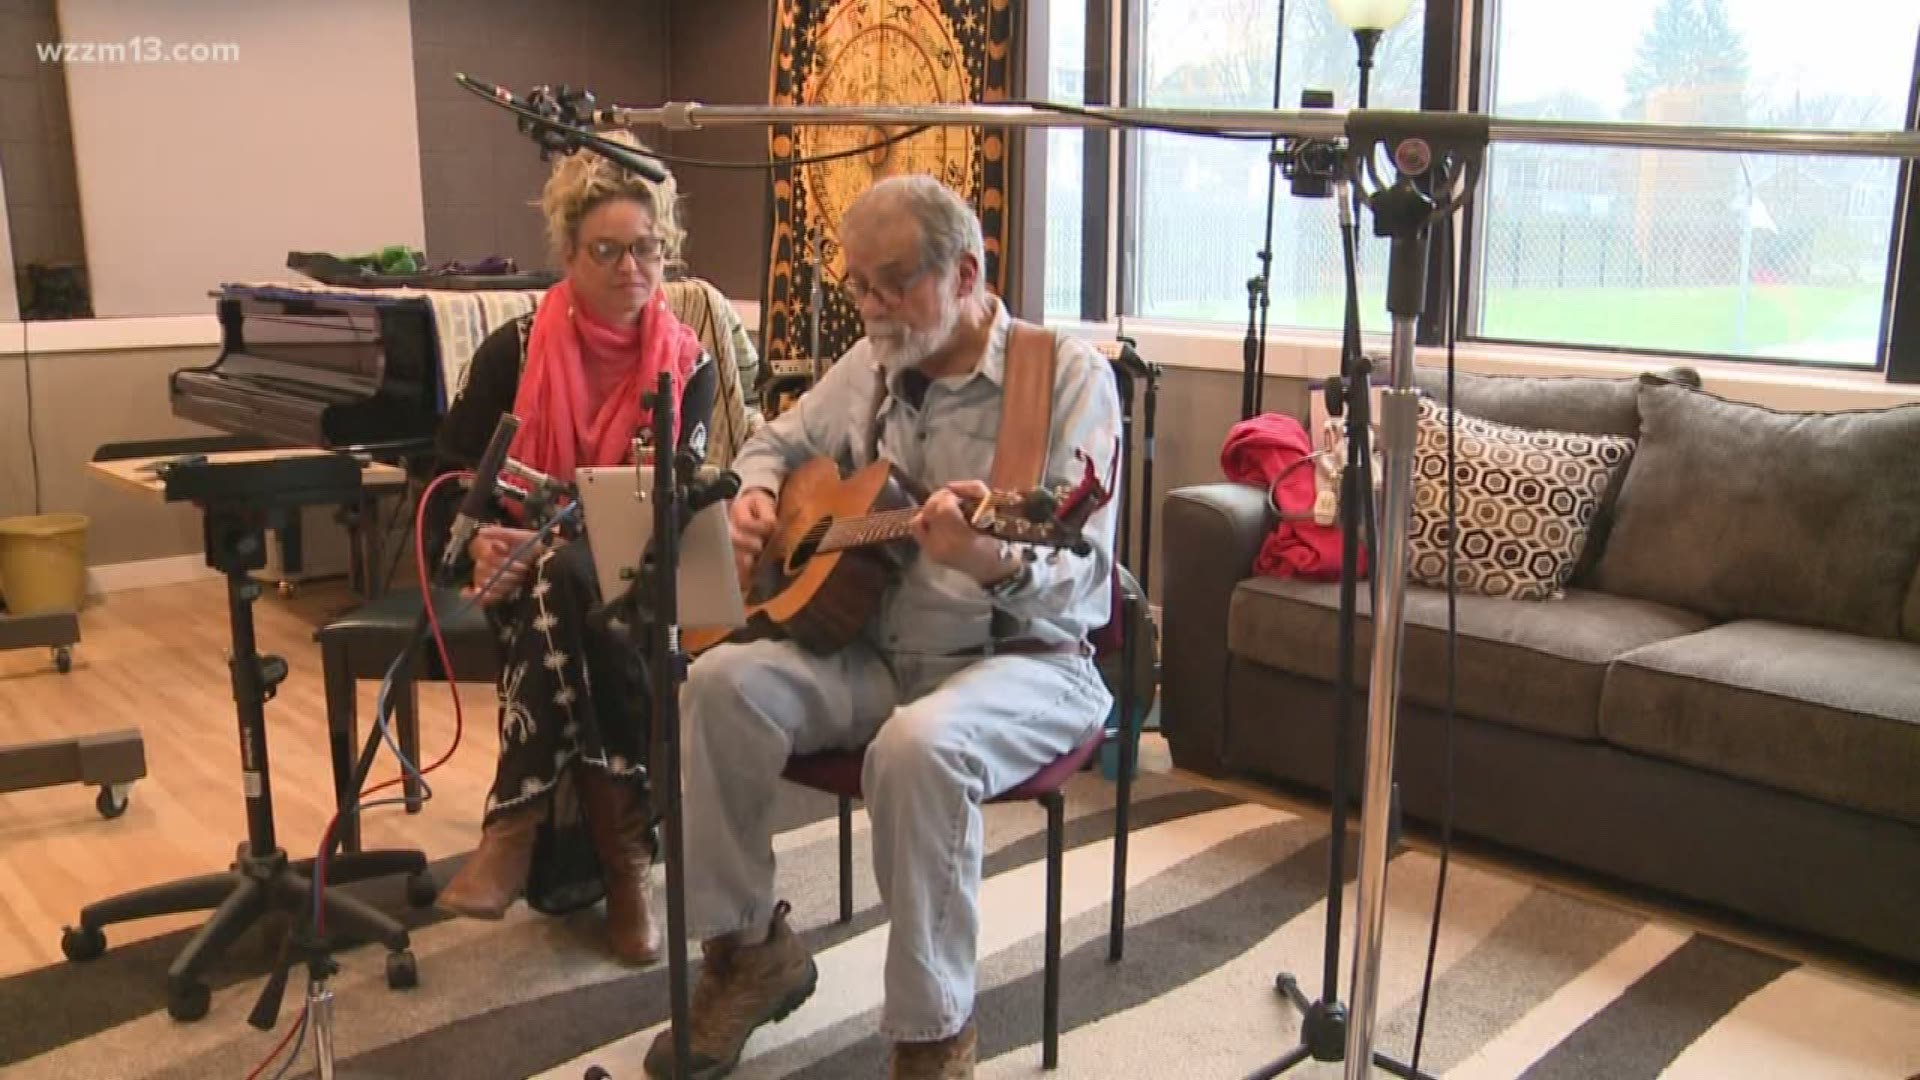 Hospice patient gets opportunity to record music